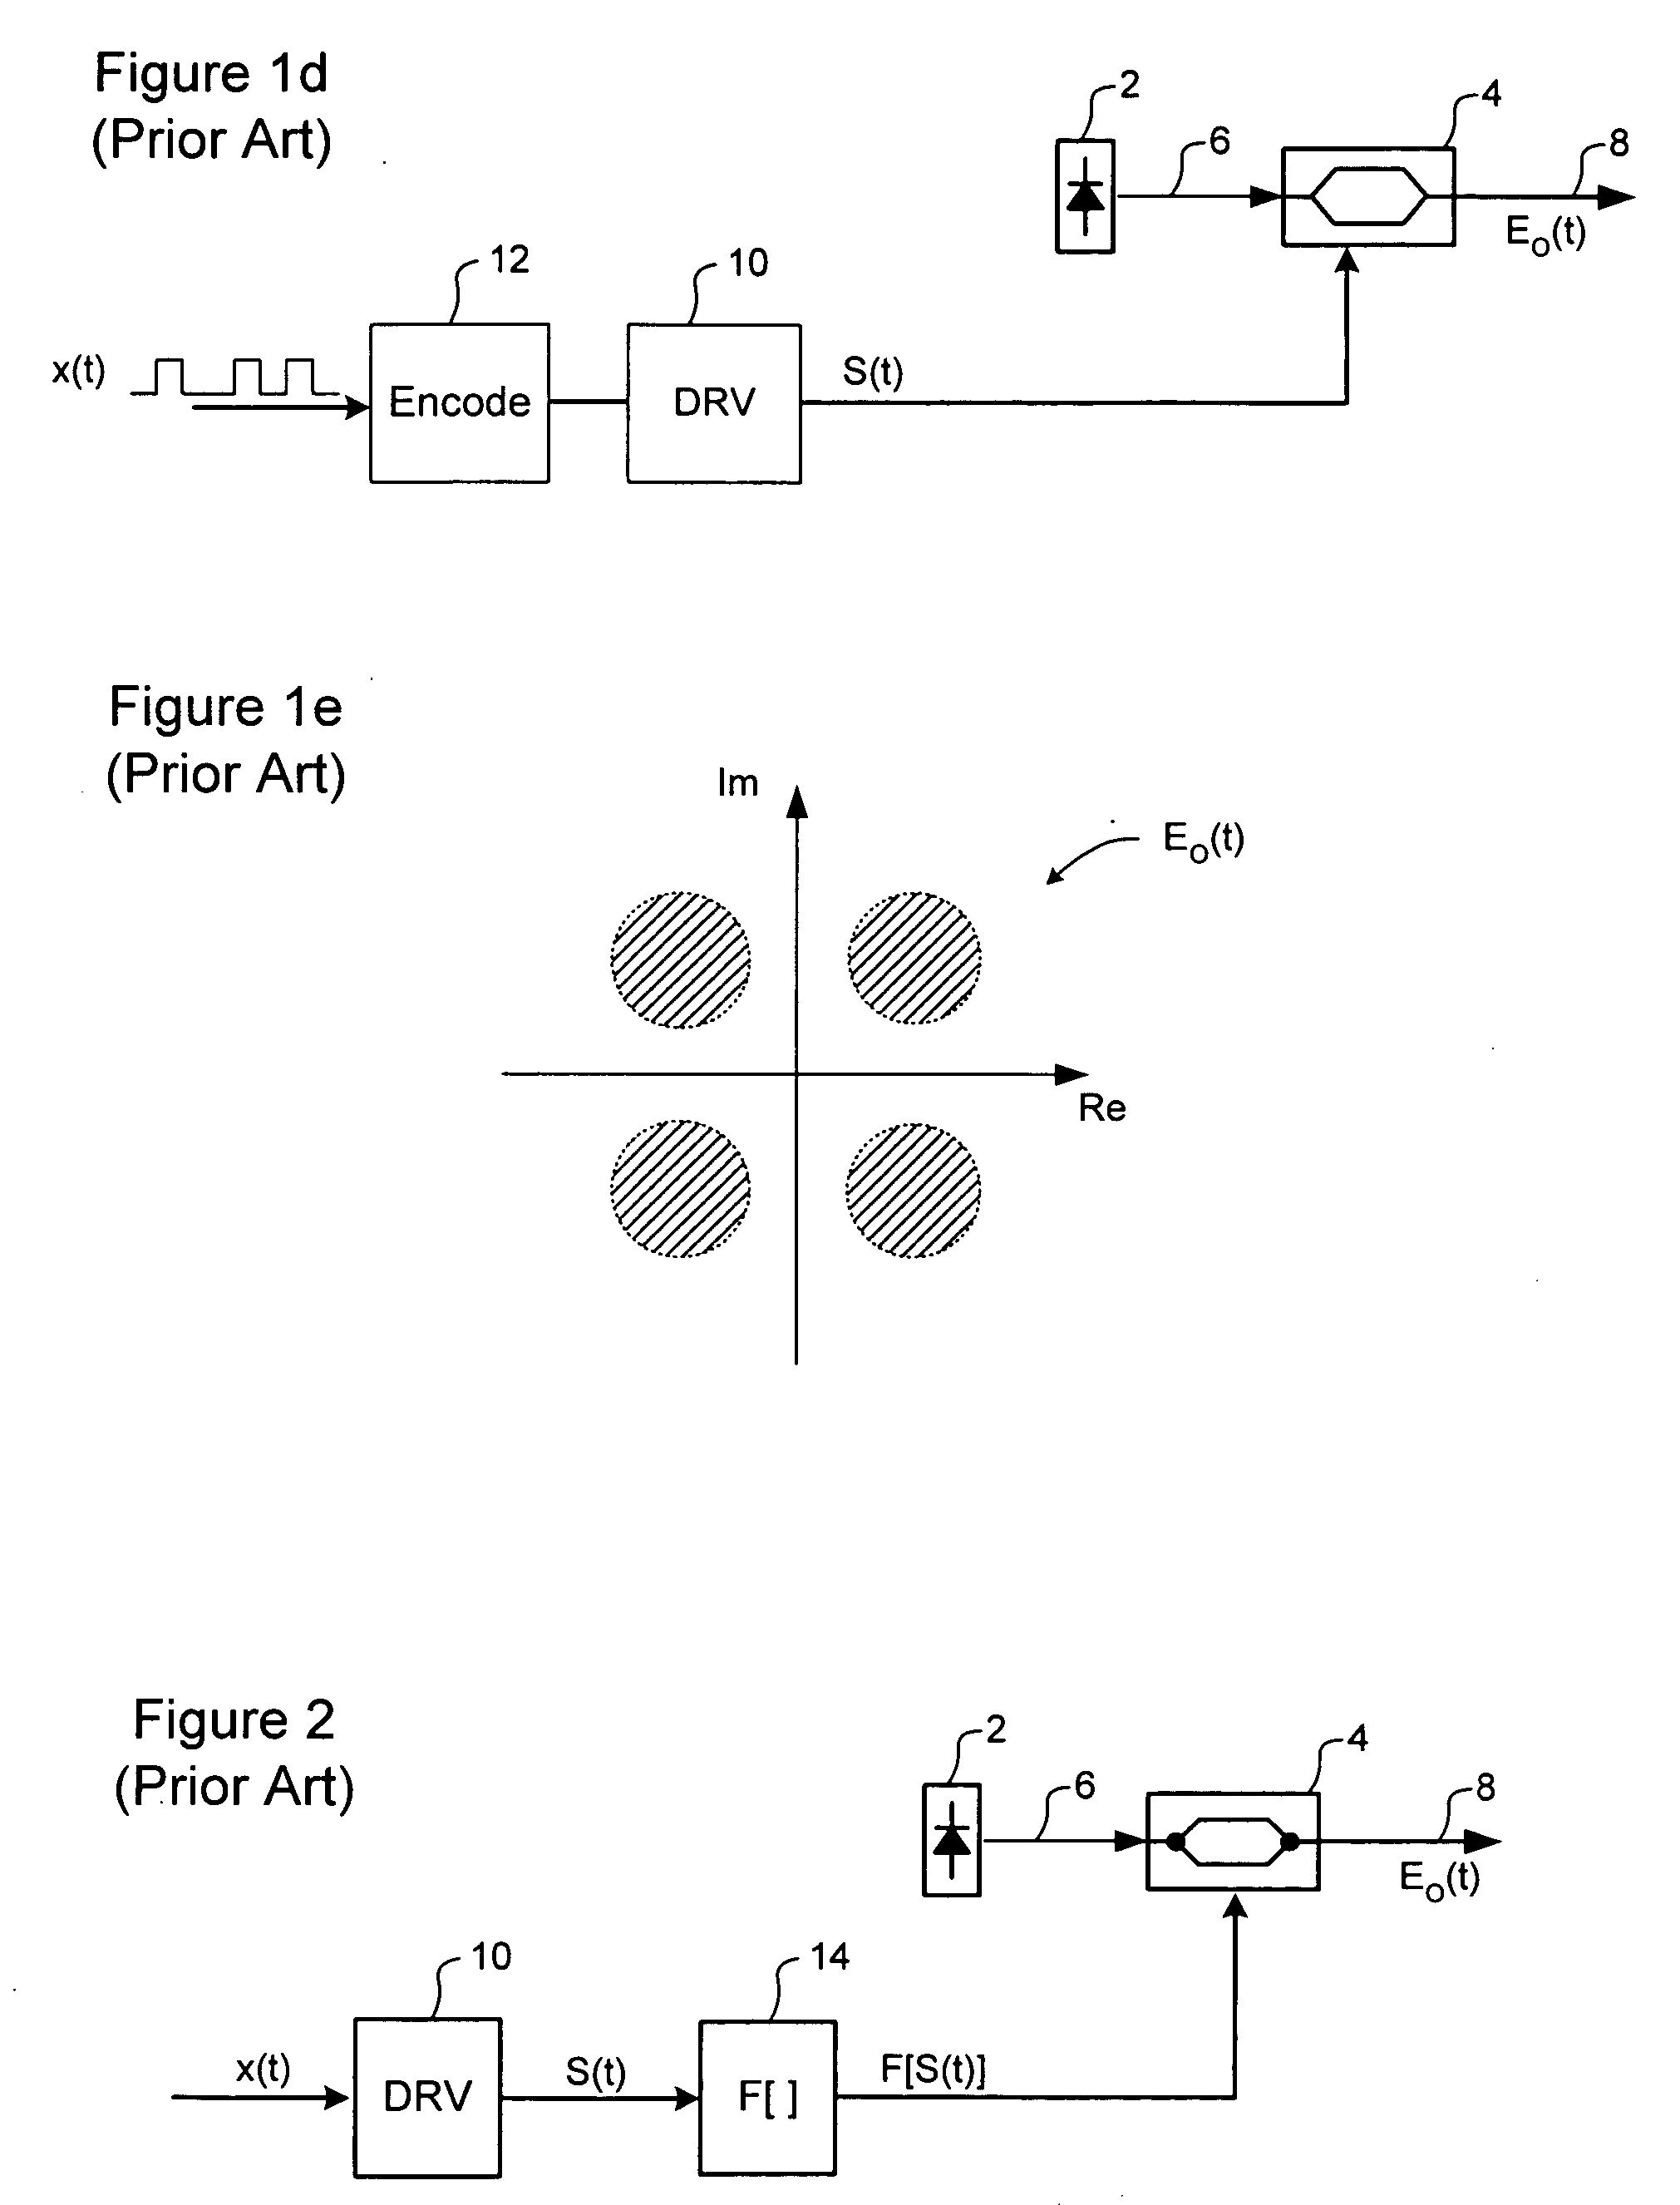 Modulation E-field based control of a non-linear transmitter